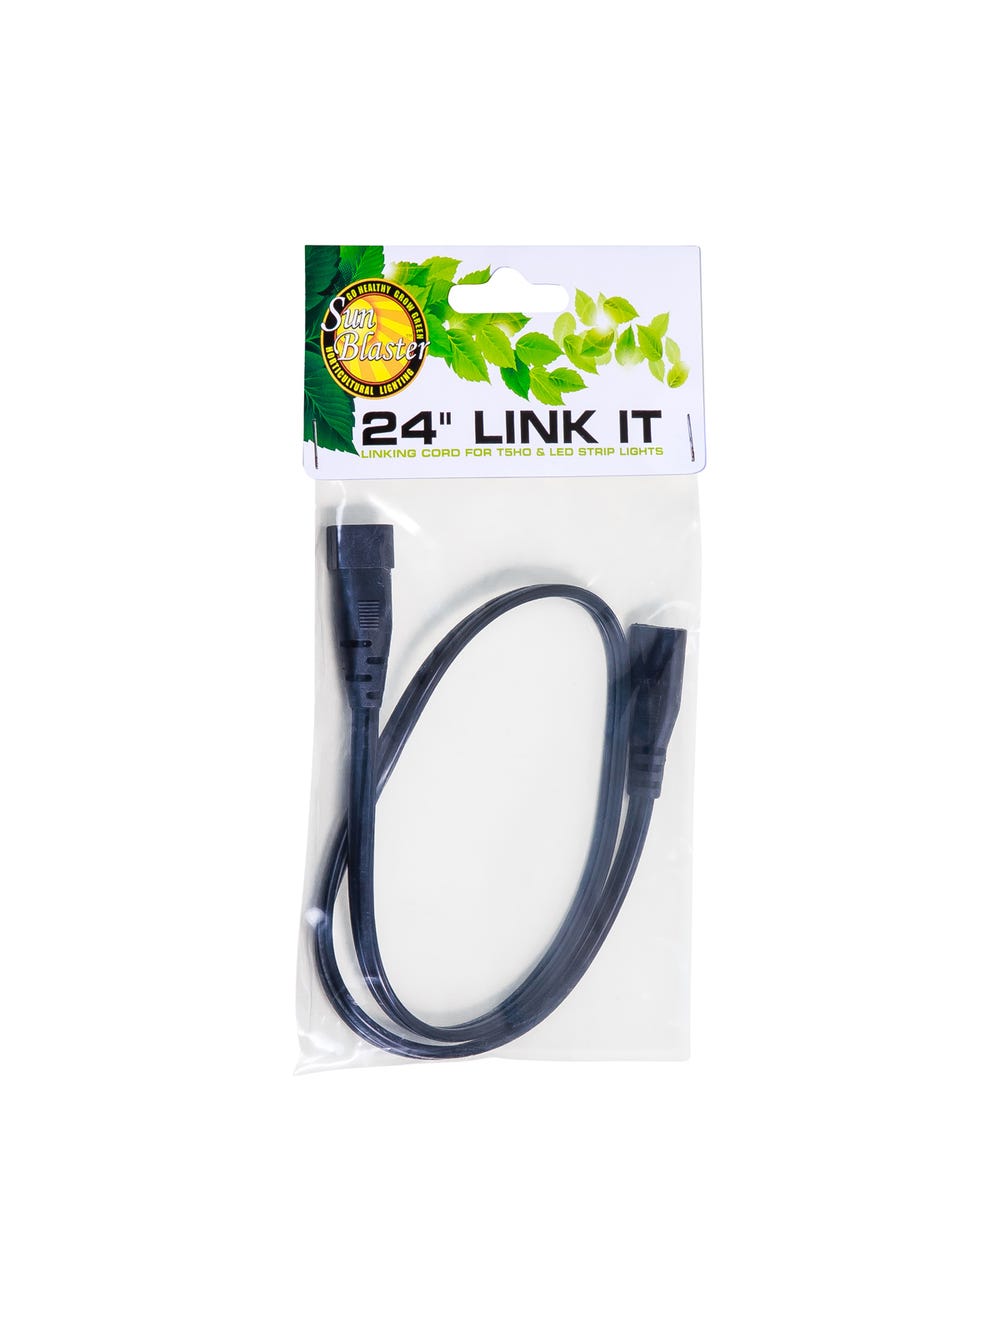 Product Image:SunBlaster Link Extension Cord for T5 and LED Strip Lights 24